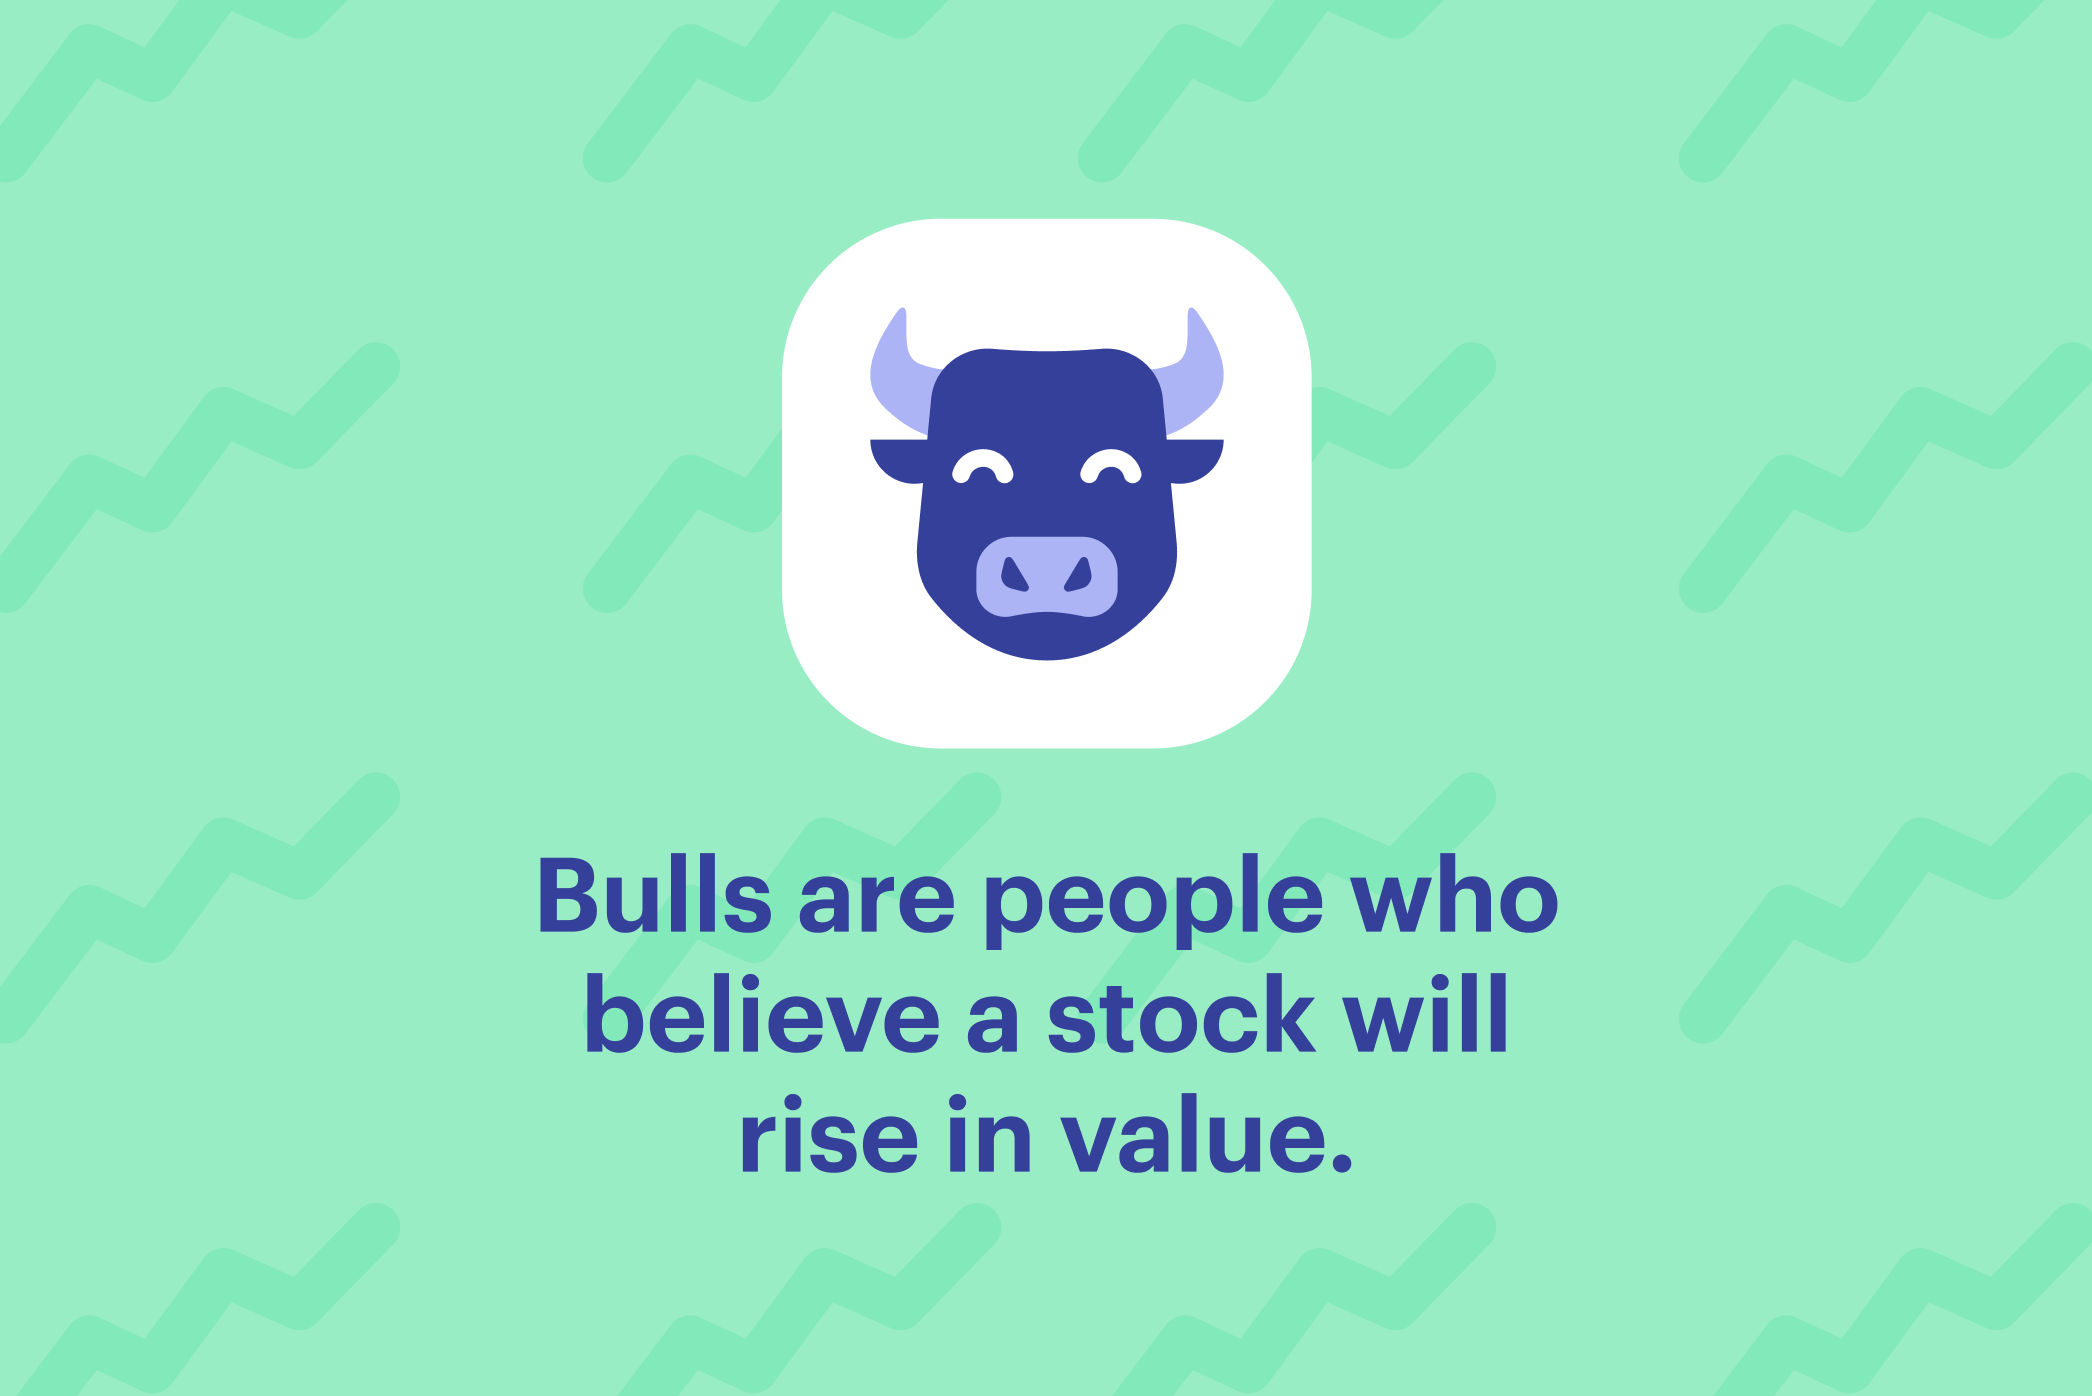 logo of bull with text underneath